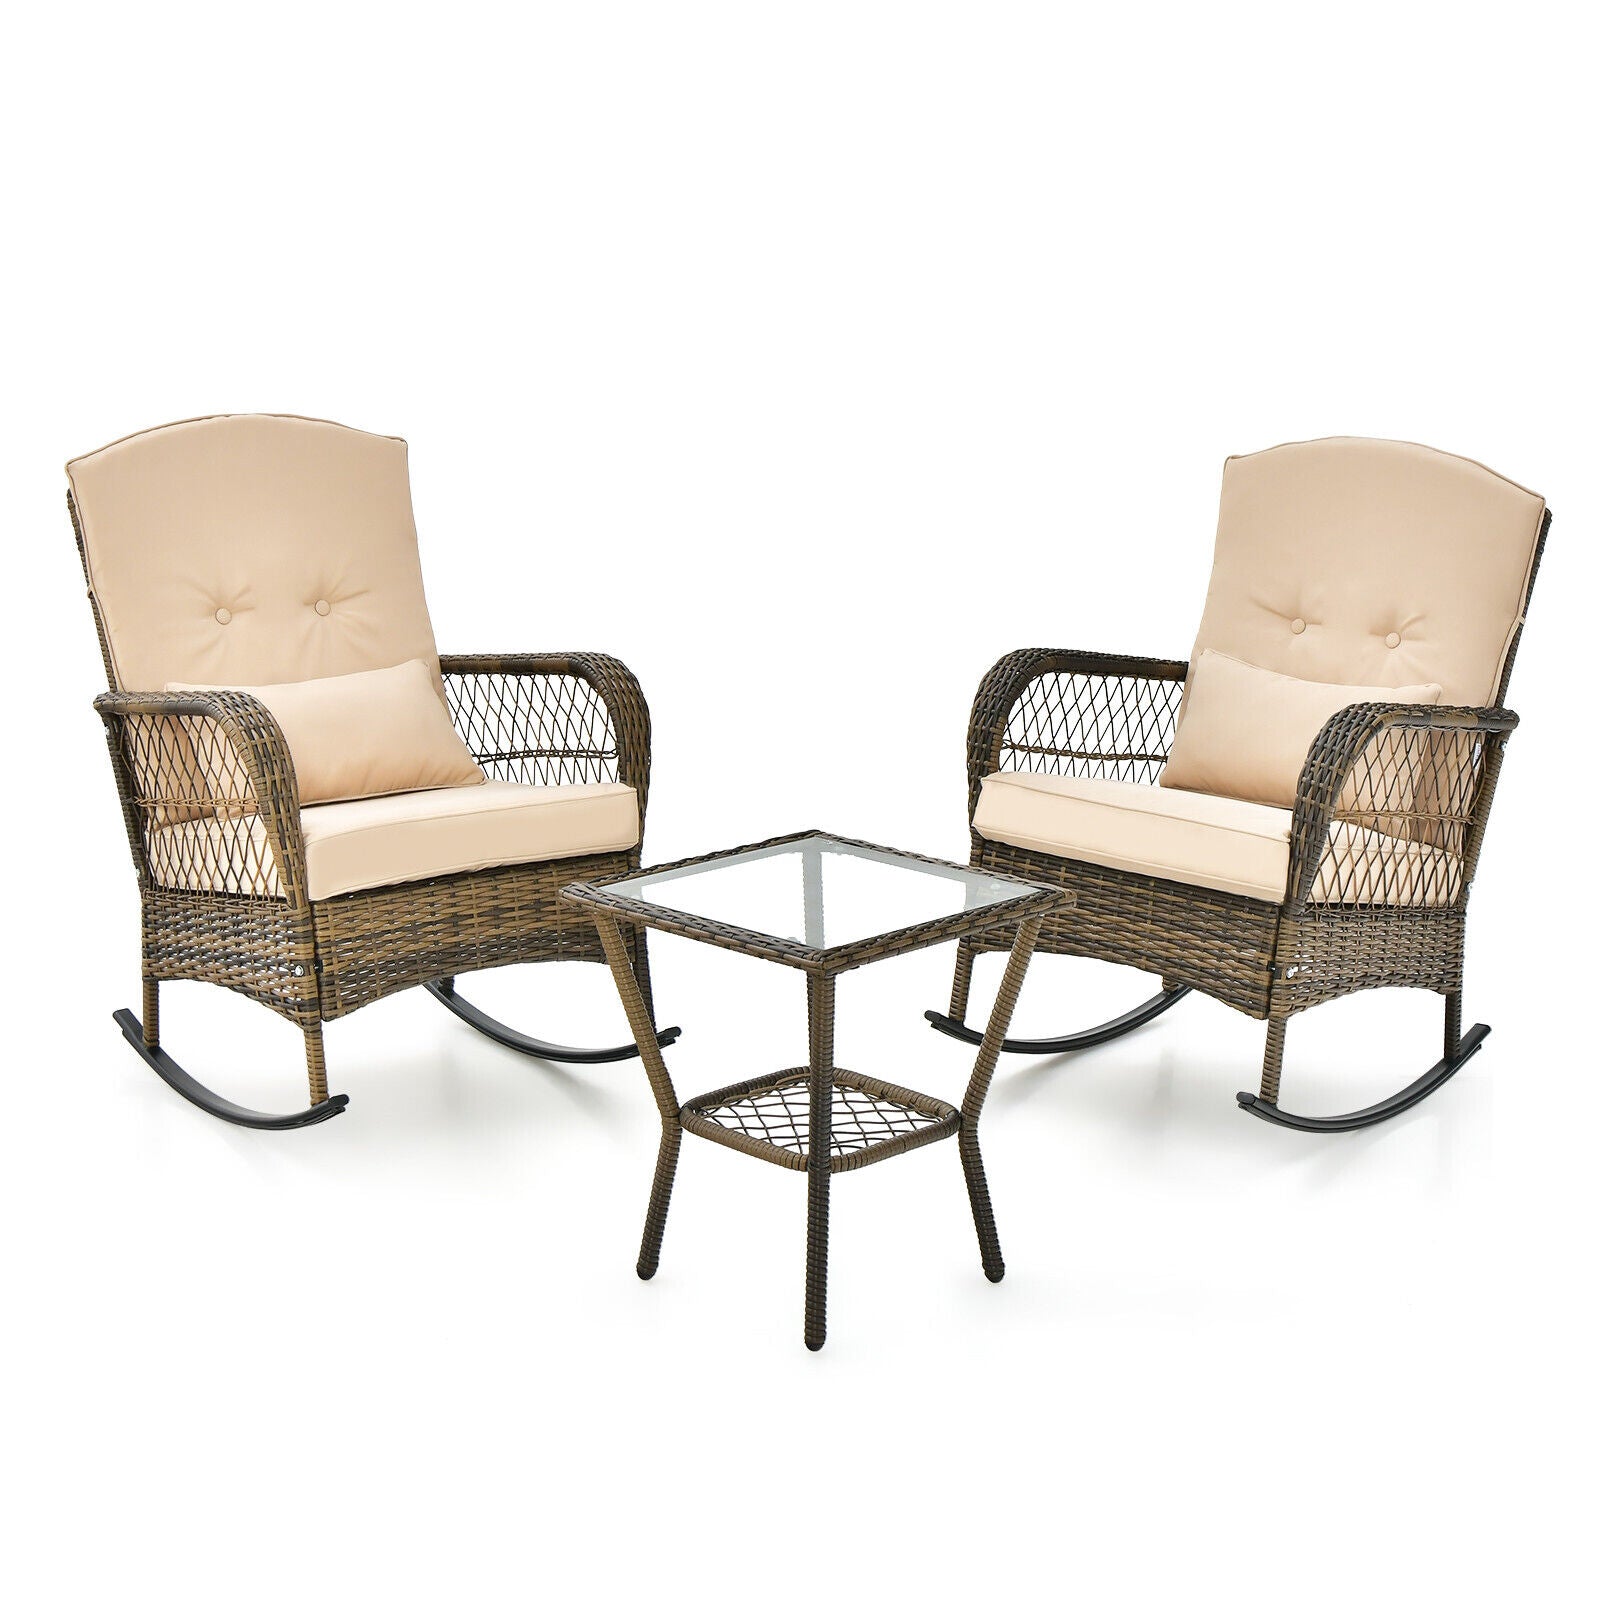 3 Piece Outdoor Rocking Chair Set with Cozy Cushions and Pillow-Beige